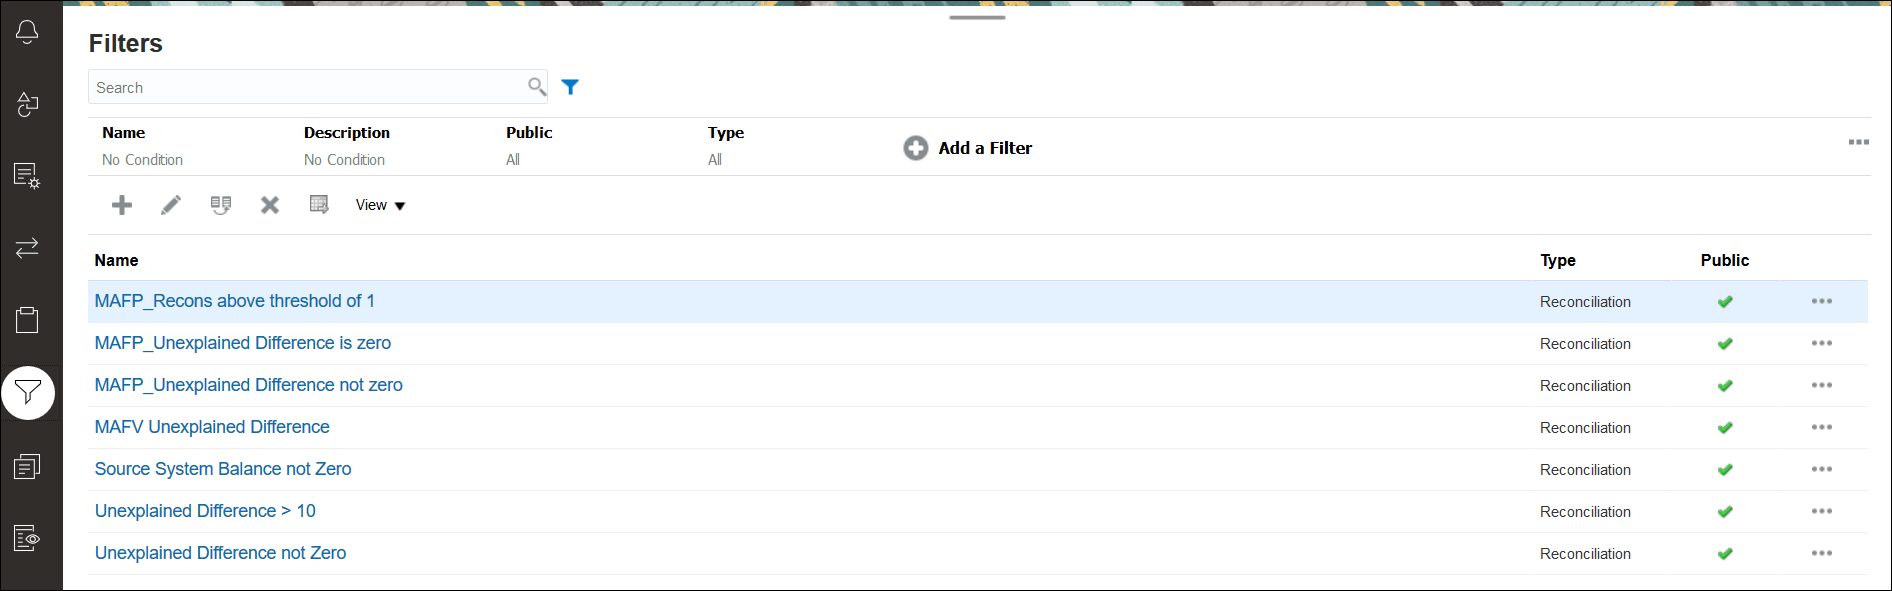 Filters page in Account Reconciliation